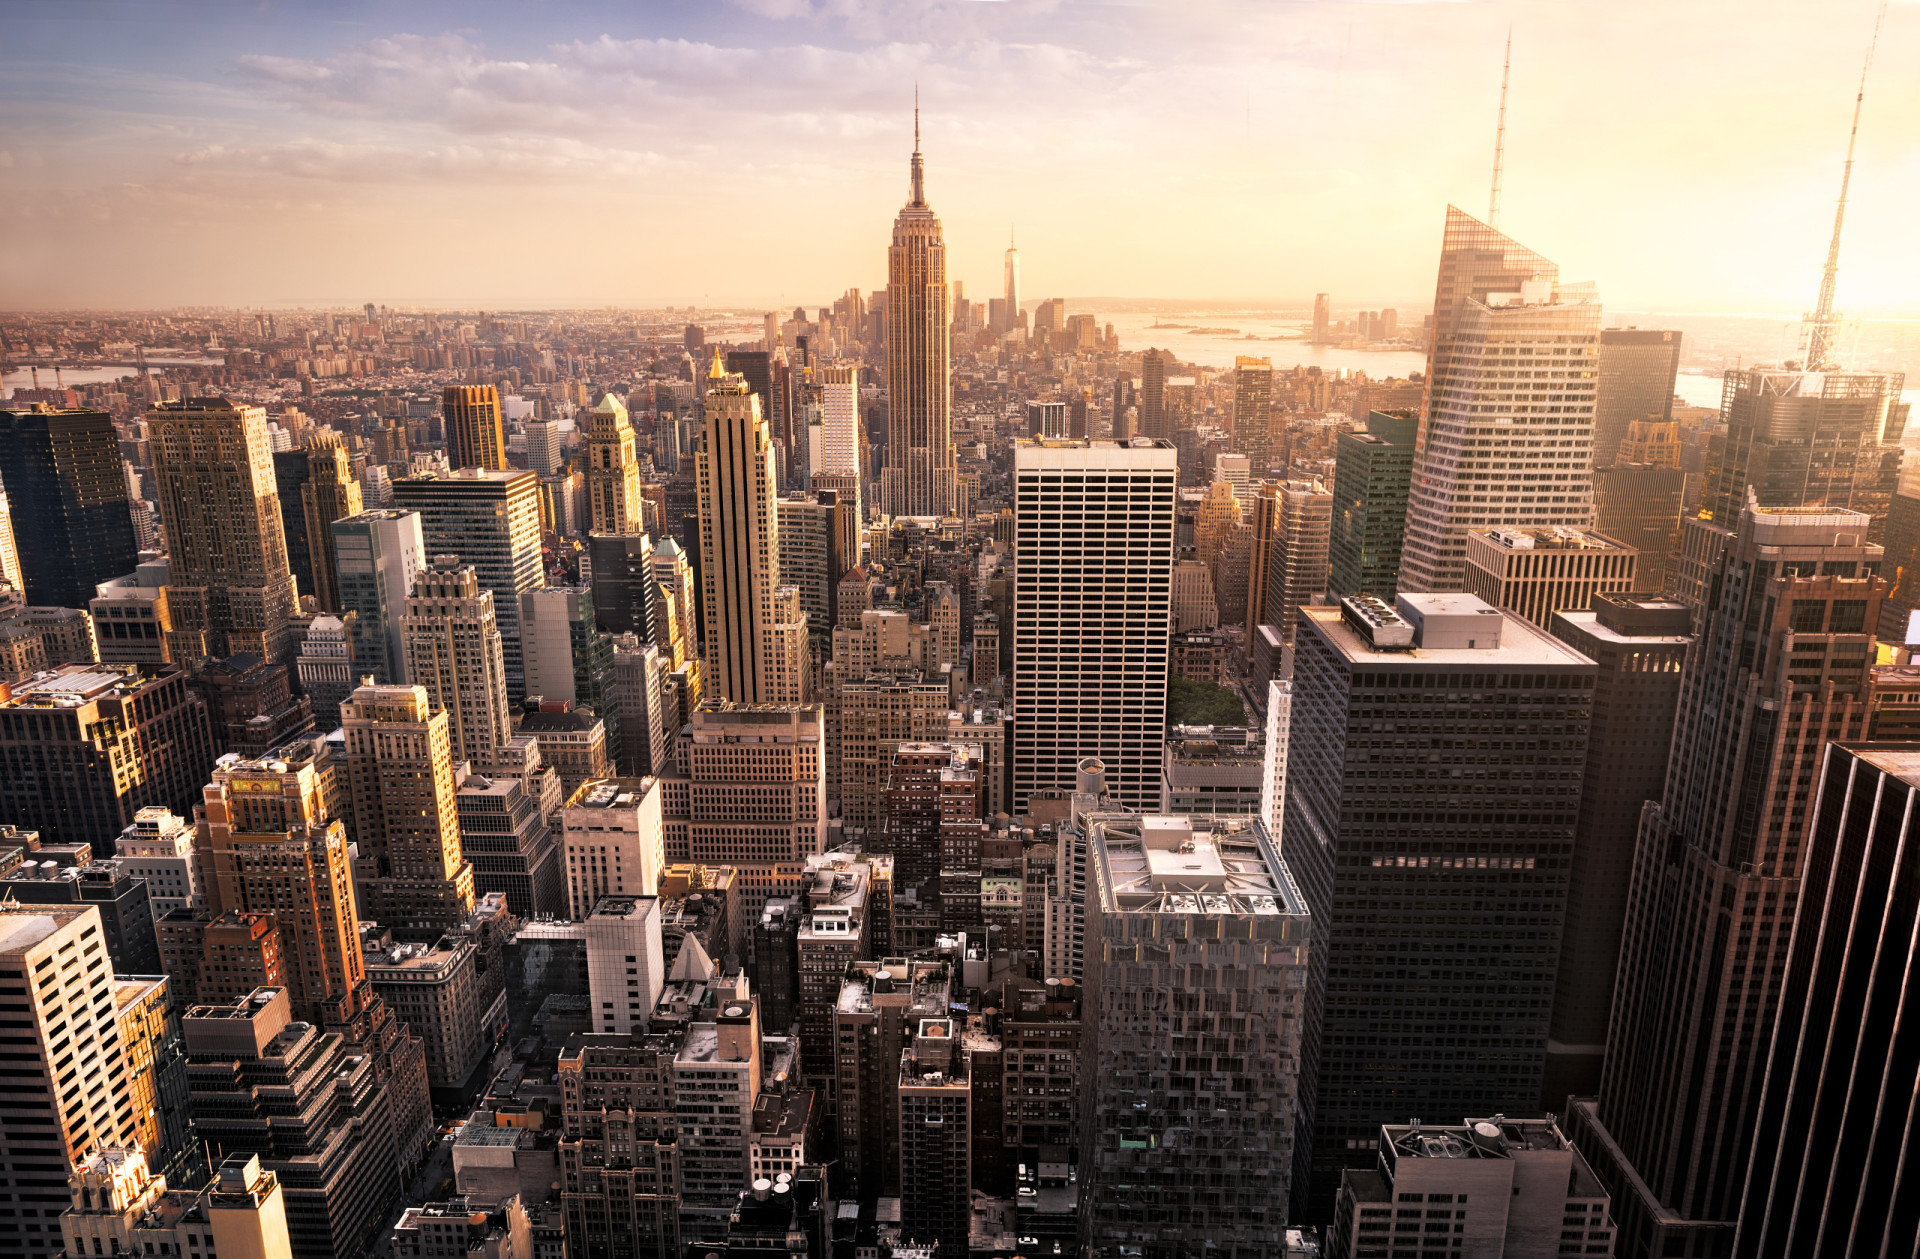 <p>New York, the epitome of urban living, leads with a rent index score of 100. Known as the financial and cultural heart of the U.S., it combines high finance and high fashion, making it an irresistible yet pricey choice for many.</p> <p>Sources: (Yahoo Finance)</p> <p>See also: <a href="https://www.starsinsider.com/lifestyle/579662/the-countries-with-the-most-expensive-property-prices">The countries with the most expensive property prices</a></p><p>You may also like:<a href="https://www.starsinsider.com/n/323680?utm_source=msn.com&utm_medium=display&utm_campaign=referral_description&utm_content=651794en-in"> Celebs who turned down plastic surgery</a></p>